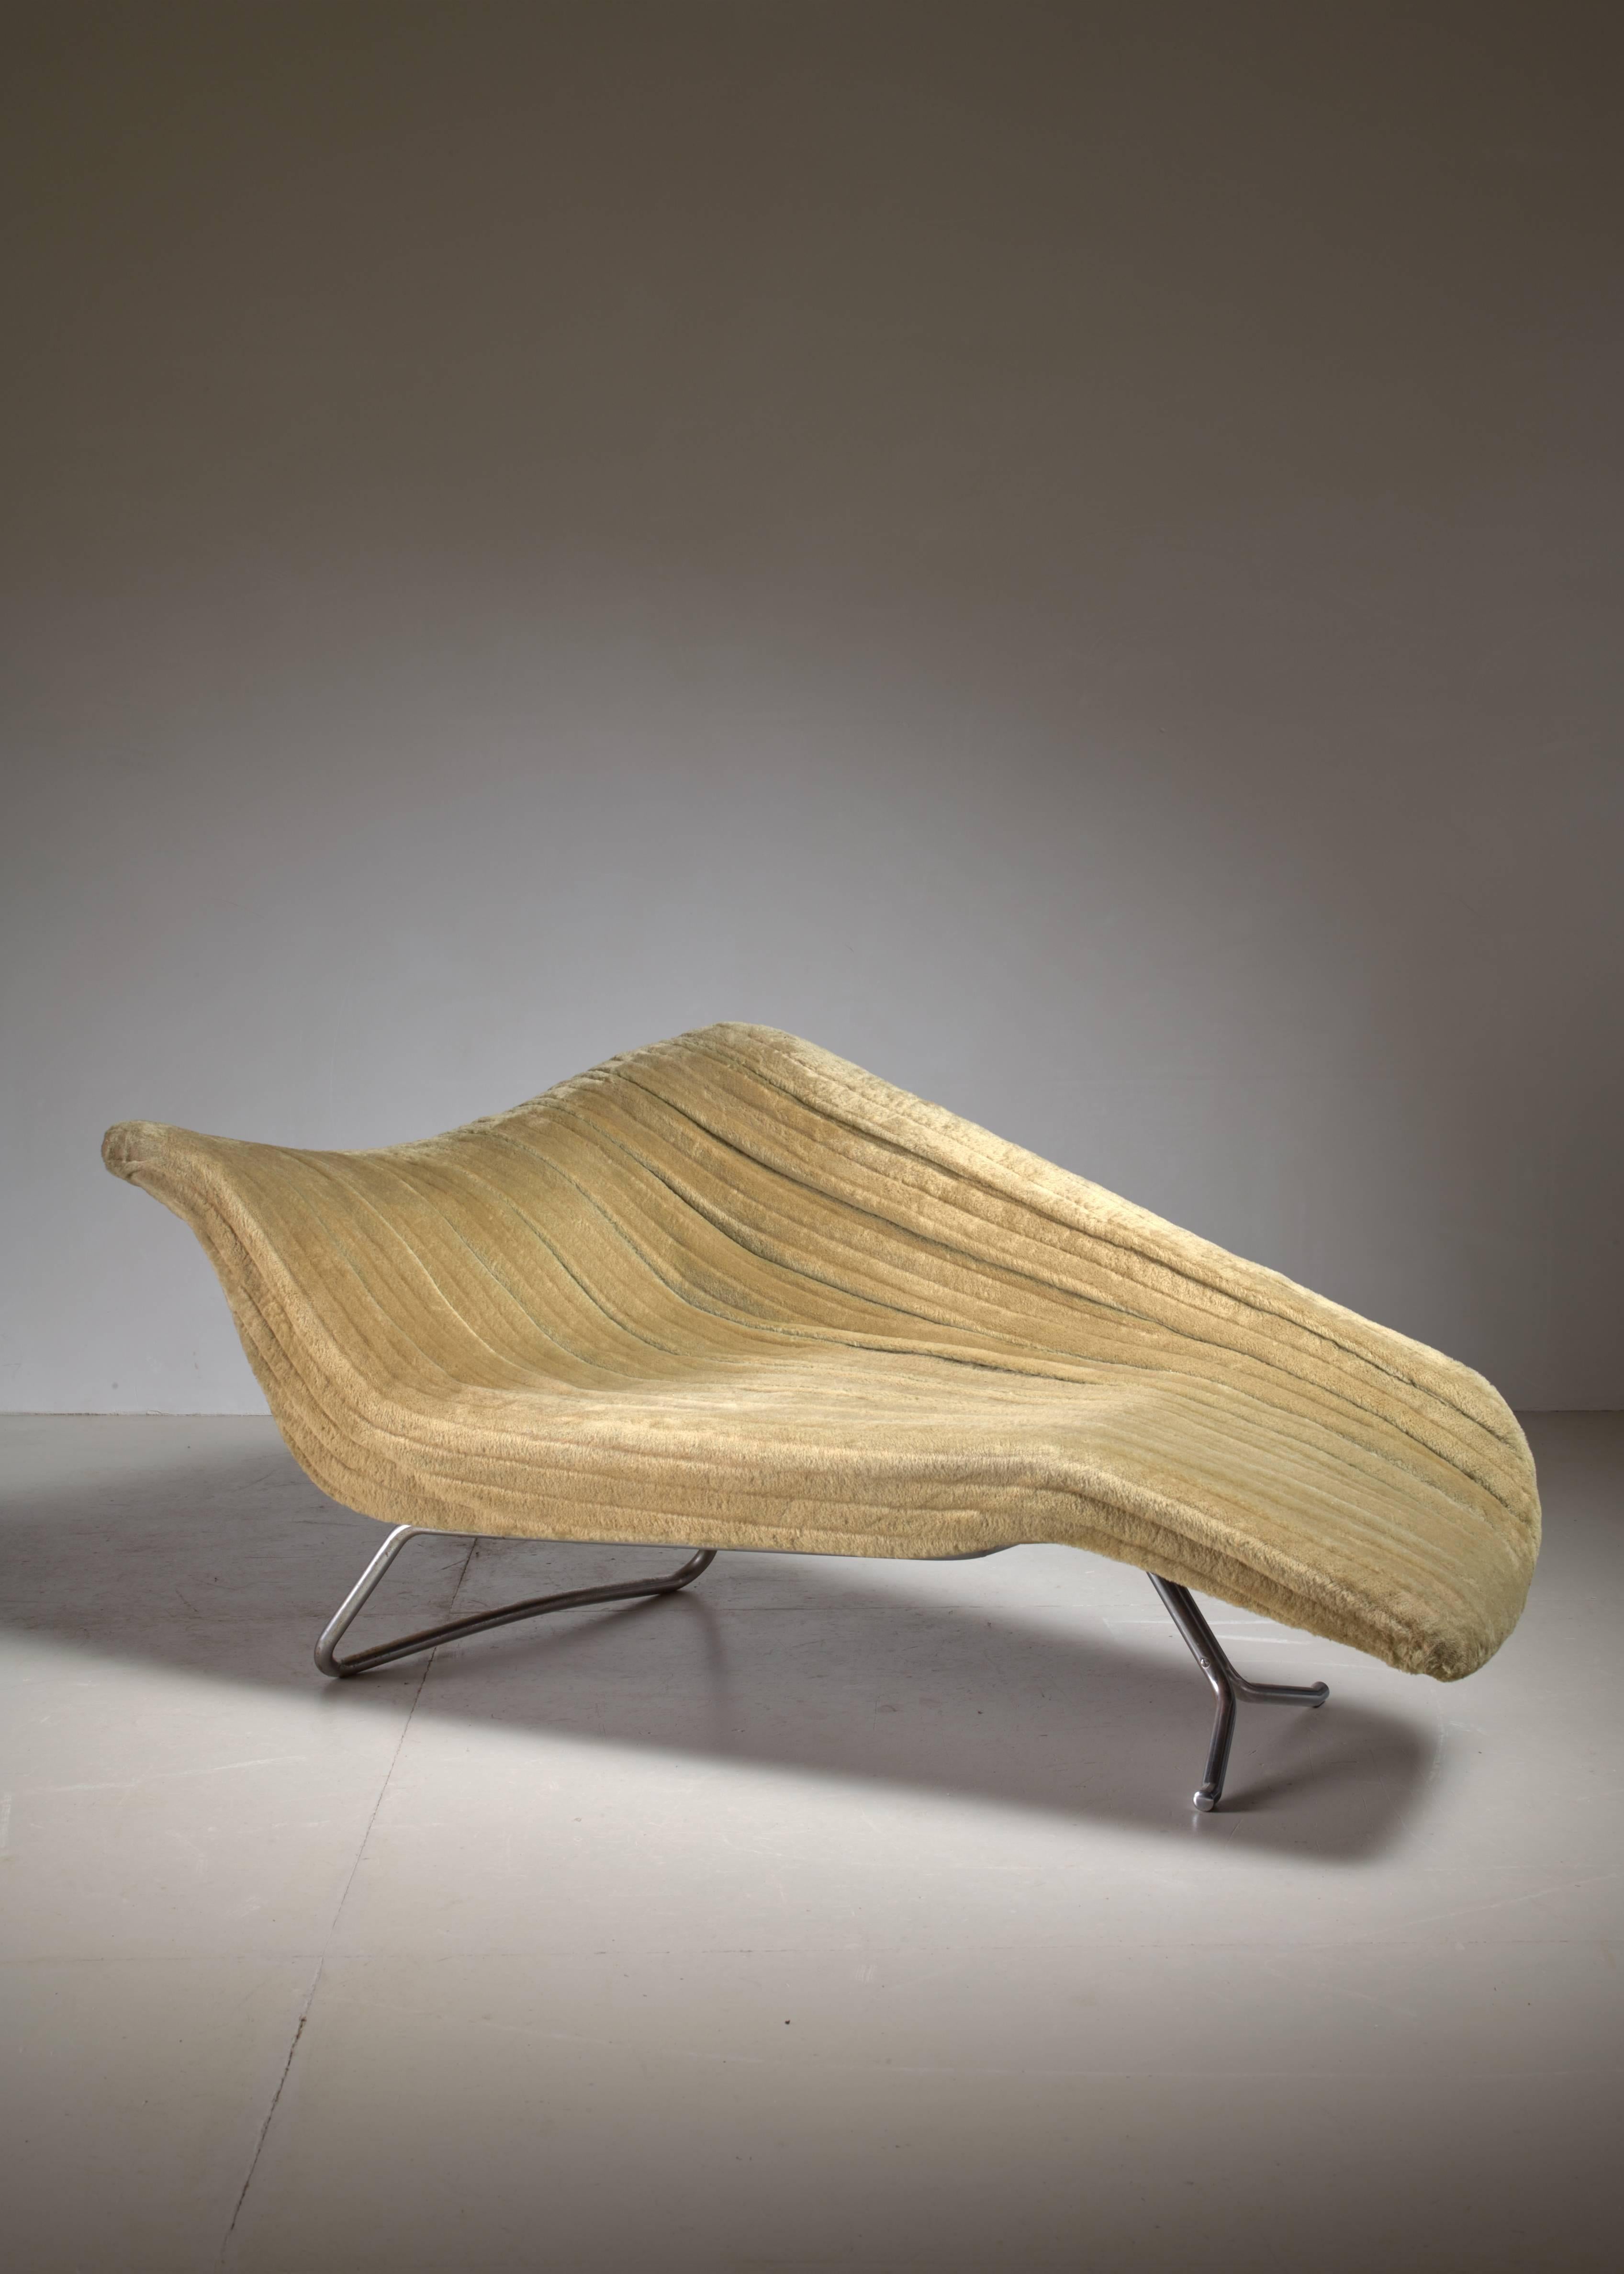 A rare sculptural chaise longue from the 1950s by Danish designer Hans Hartl for Eugen Schmid. The chair is made of a tubular chrome frame with an olive green velour upholstery. Both the frame and fabric are in a good vintage condition, but the foam